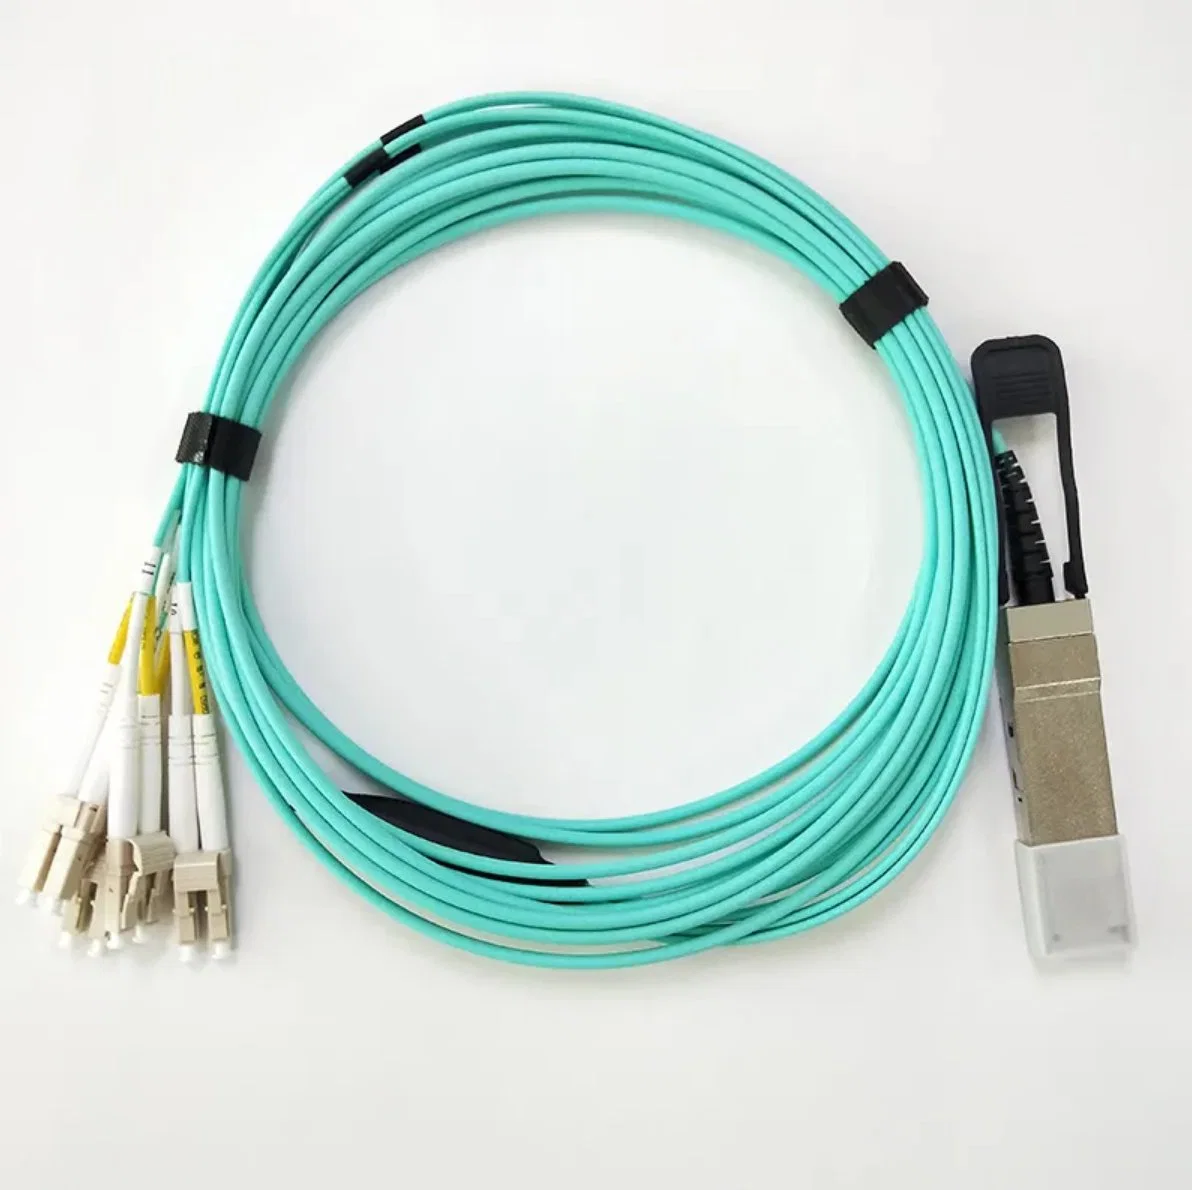 Bundle Patch Cable 12 Core LC MPO Patch Cord 40g Qsfp+ to 8LC Connector Breakout Fiber Optical Aoc Cable